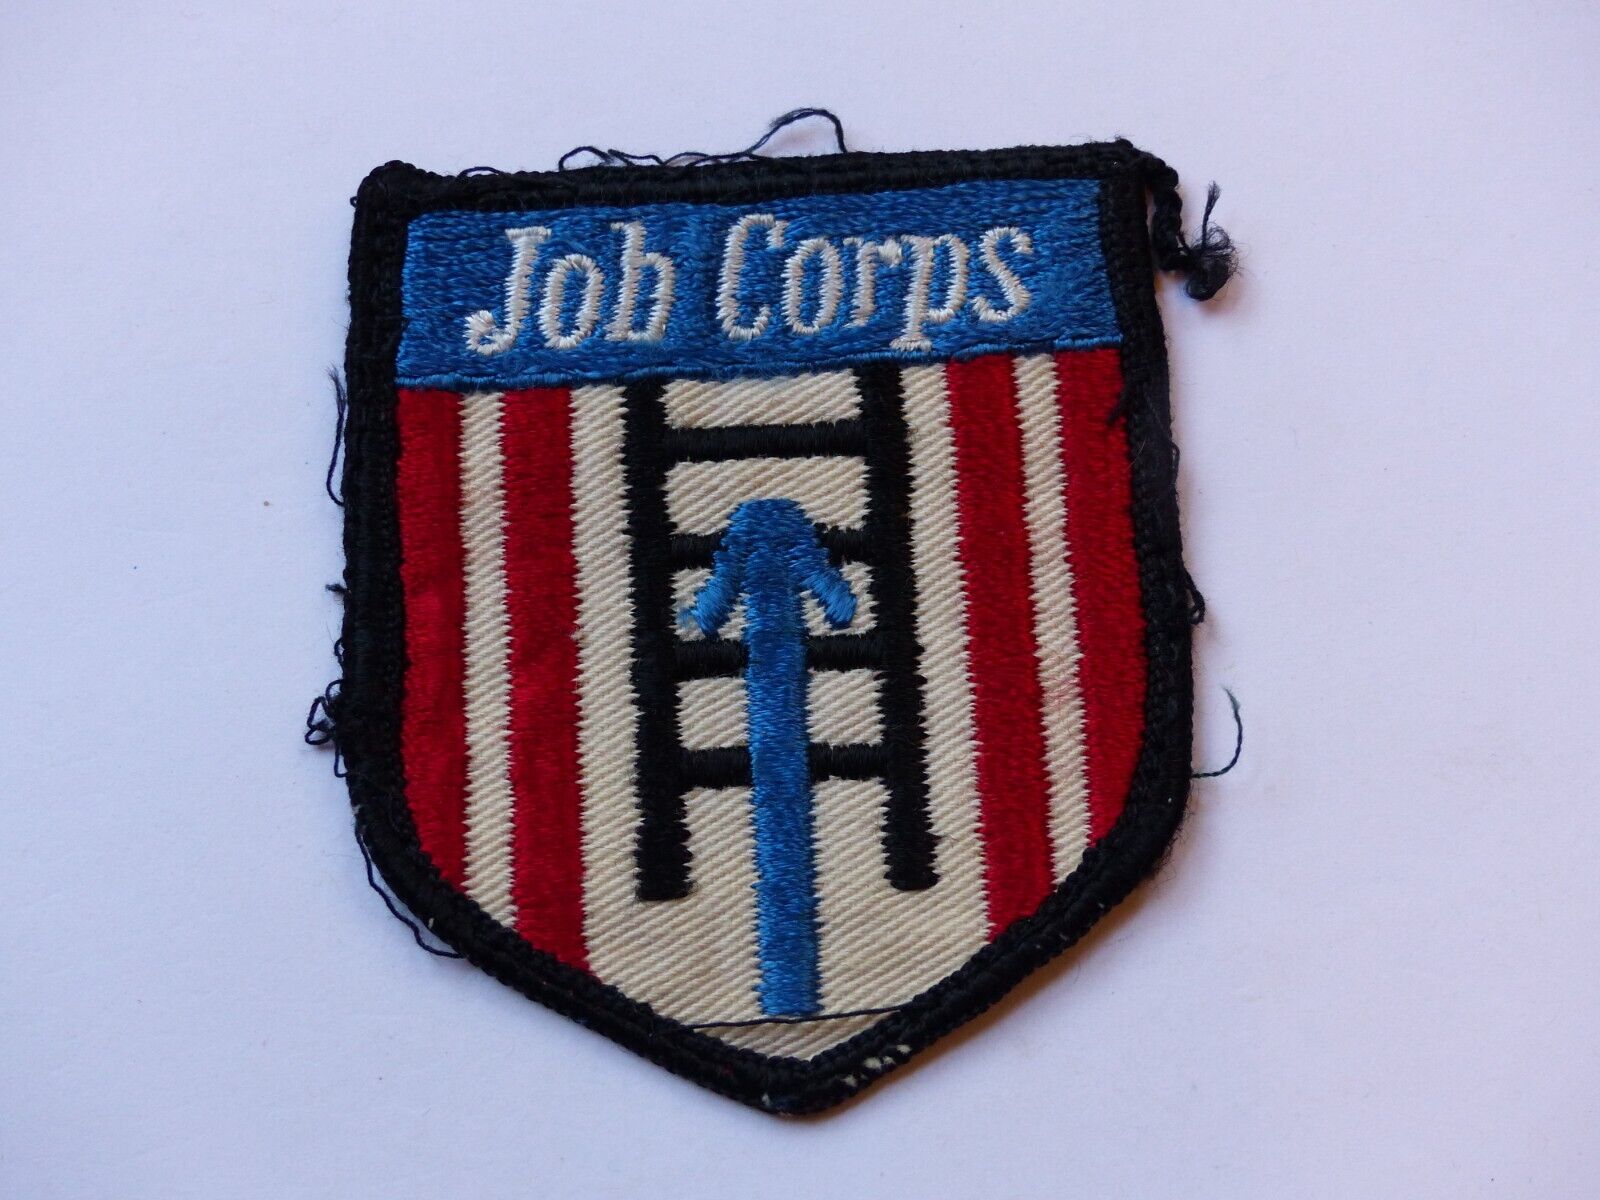 Used Vintage Job Corps Embroidered Patch Ladder Upward Arrow Employment Program